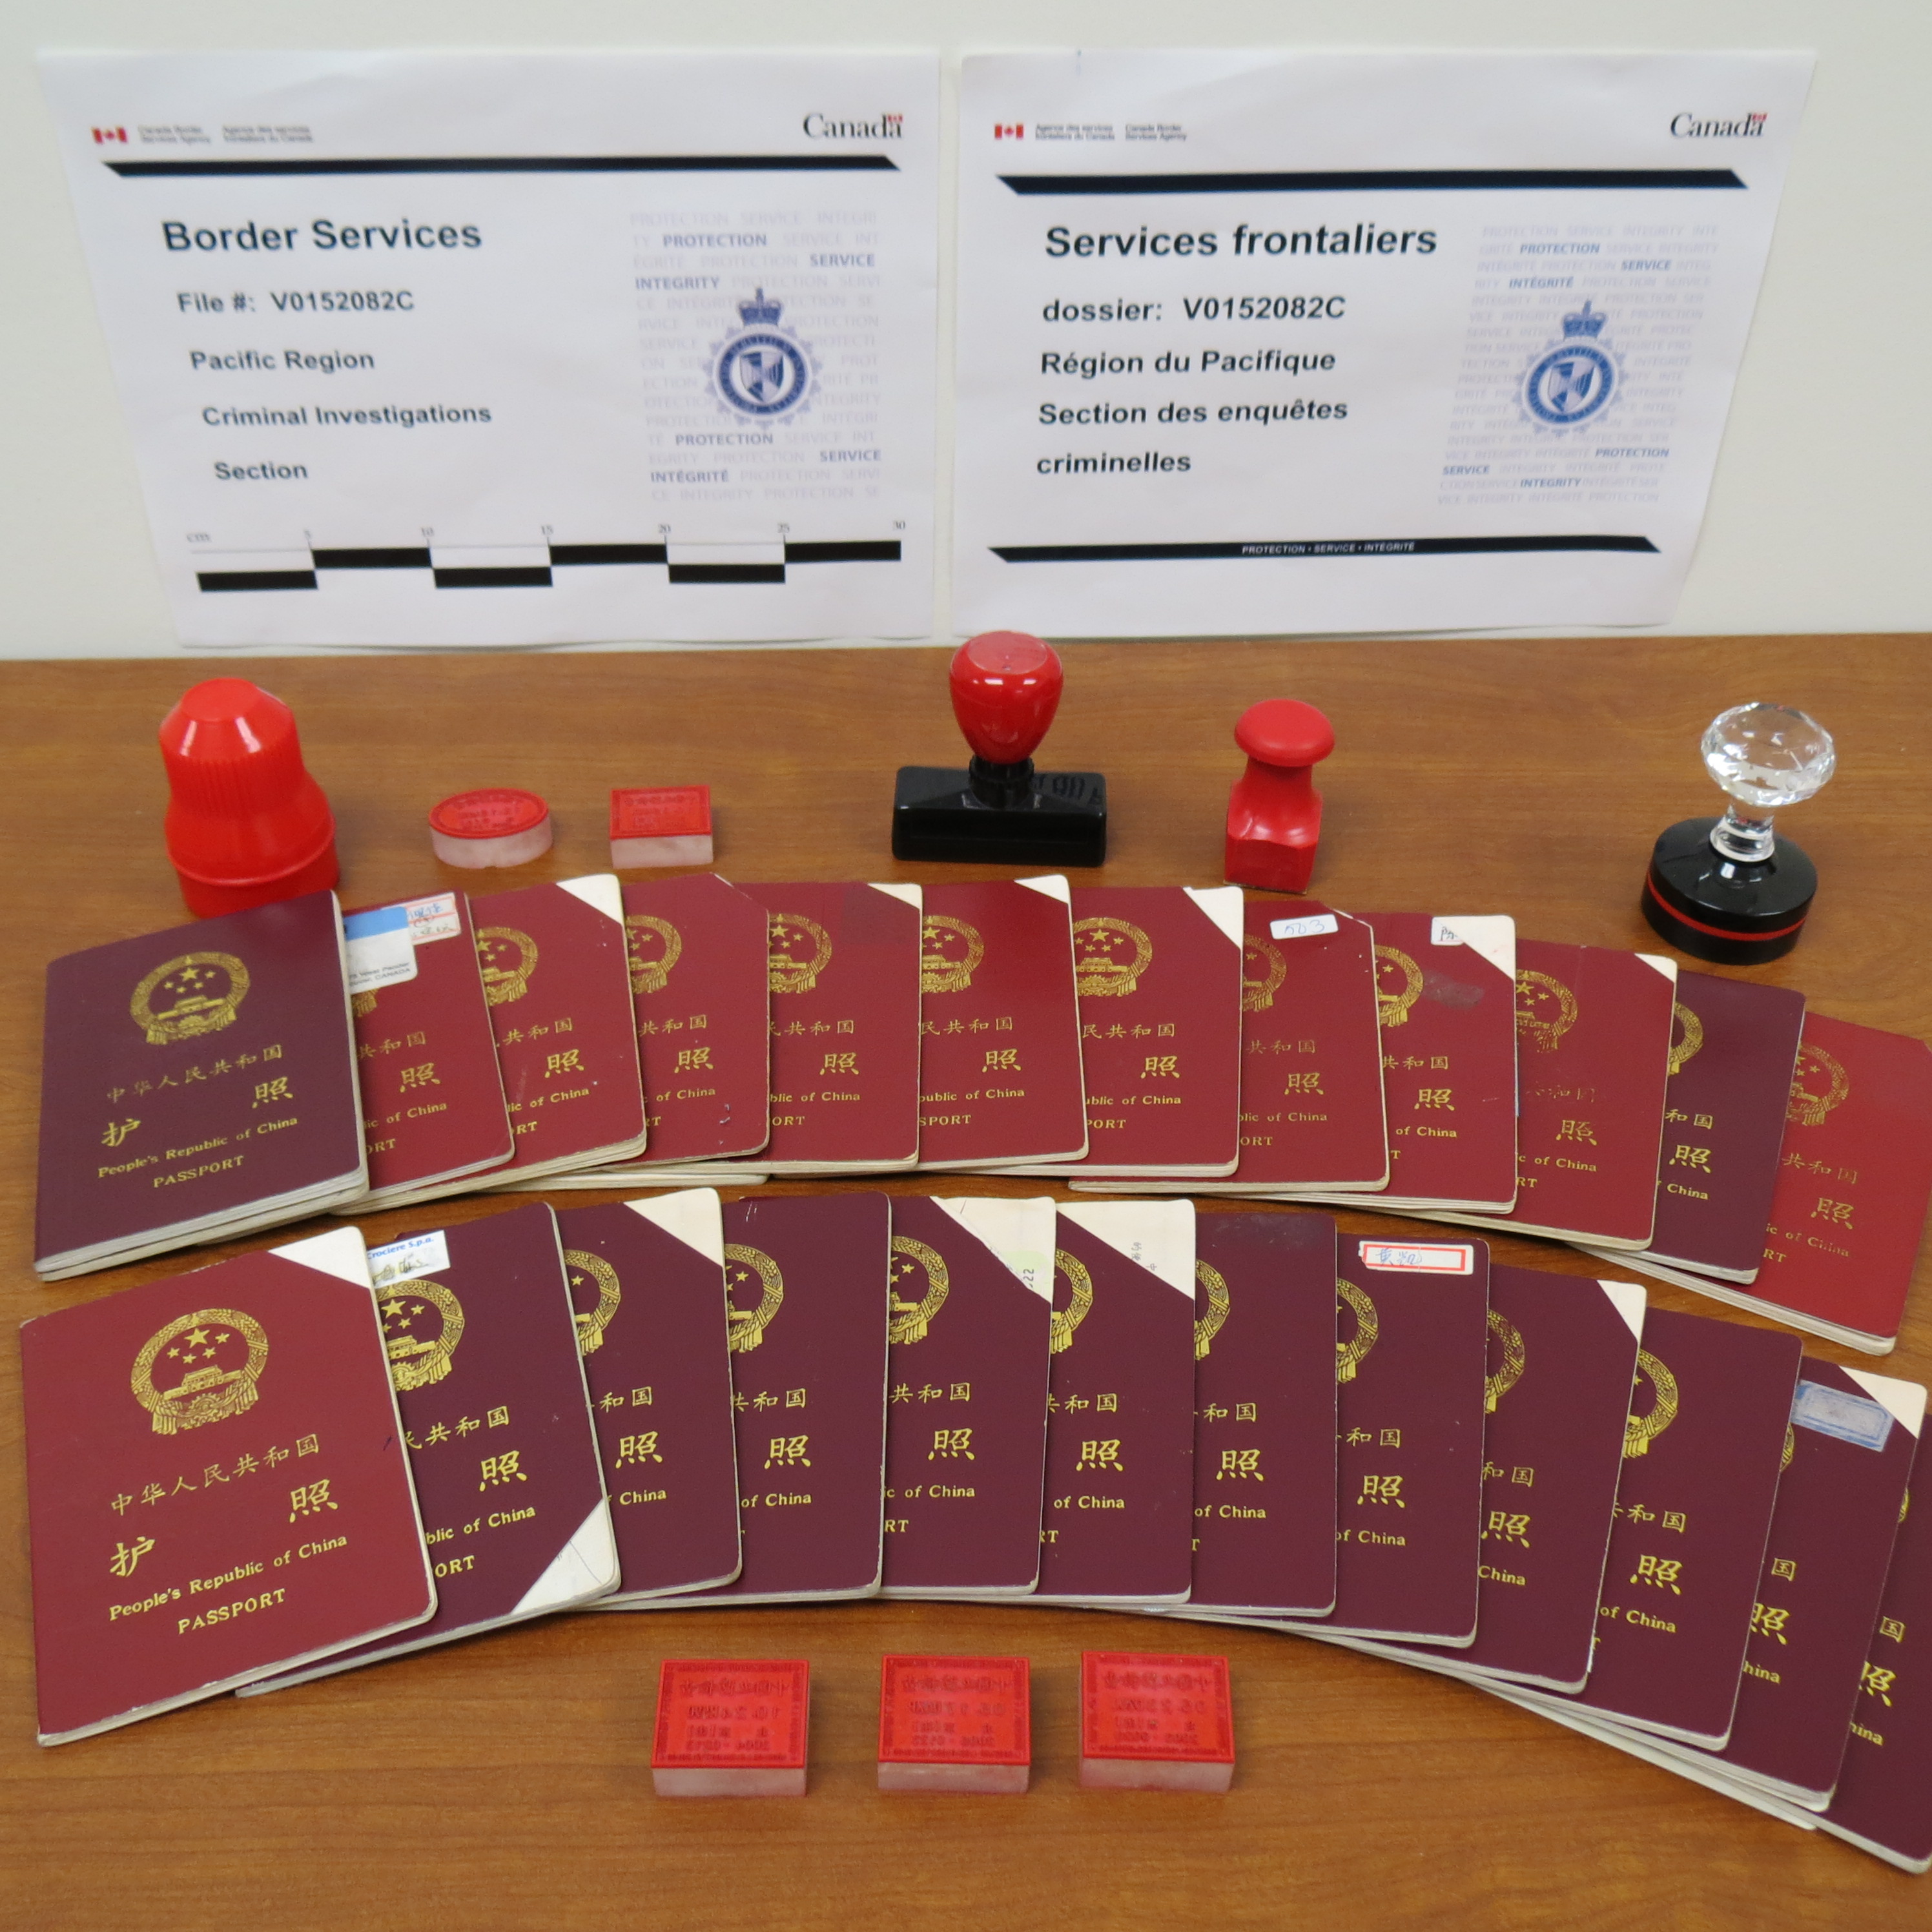 Passports with forged stamps seized by the CBSA